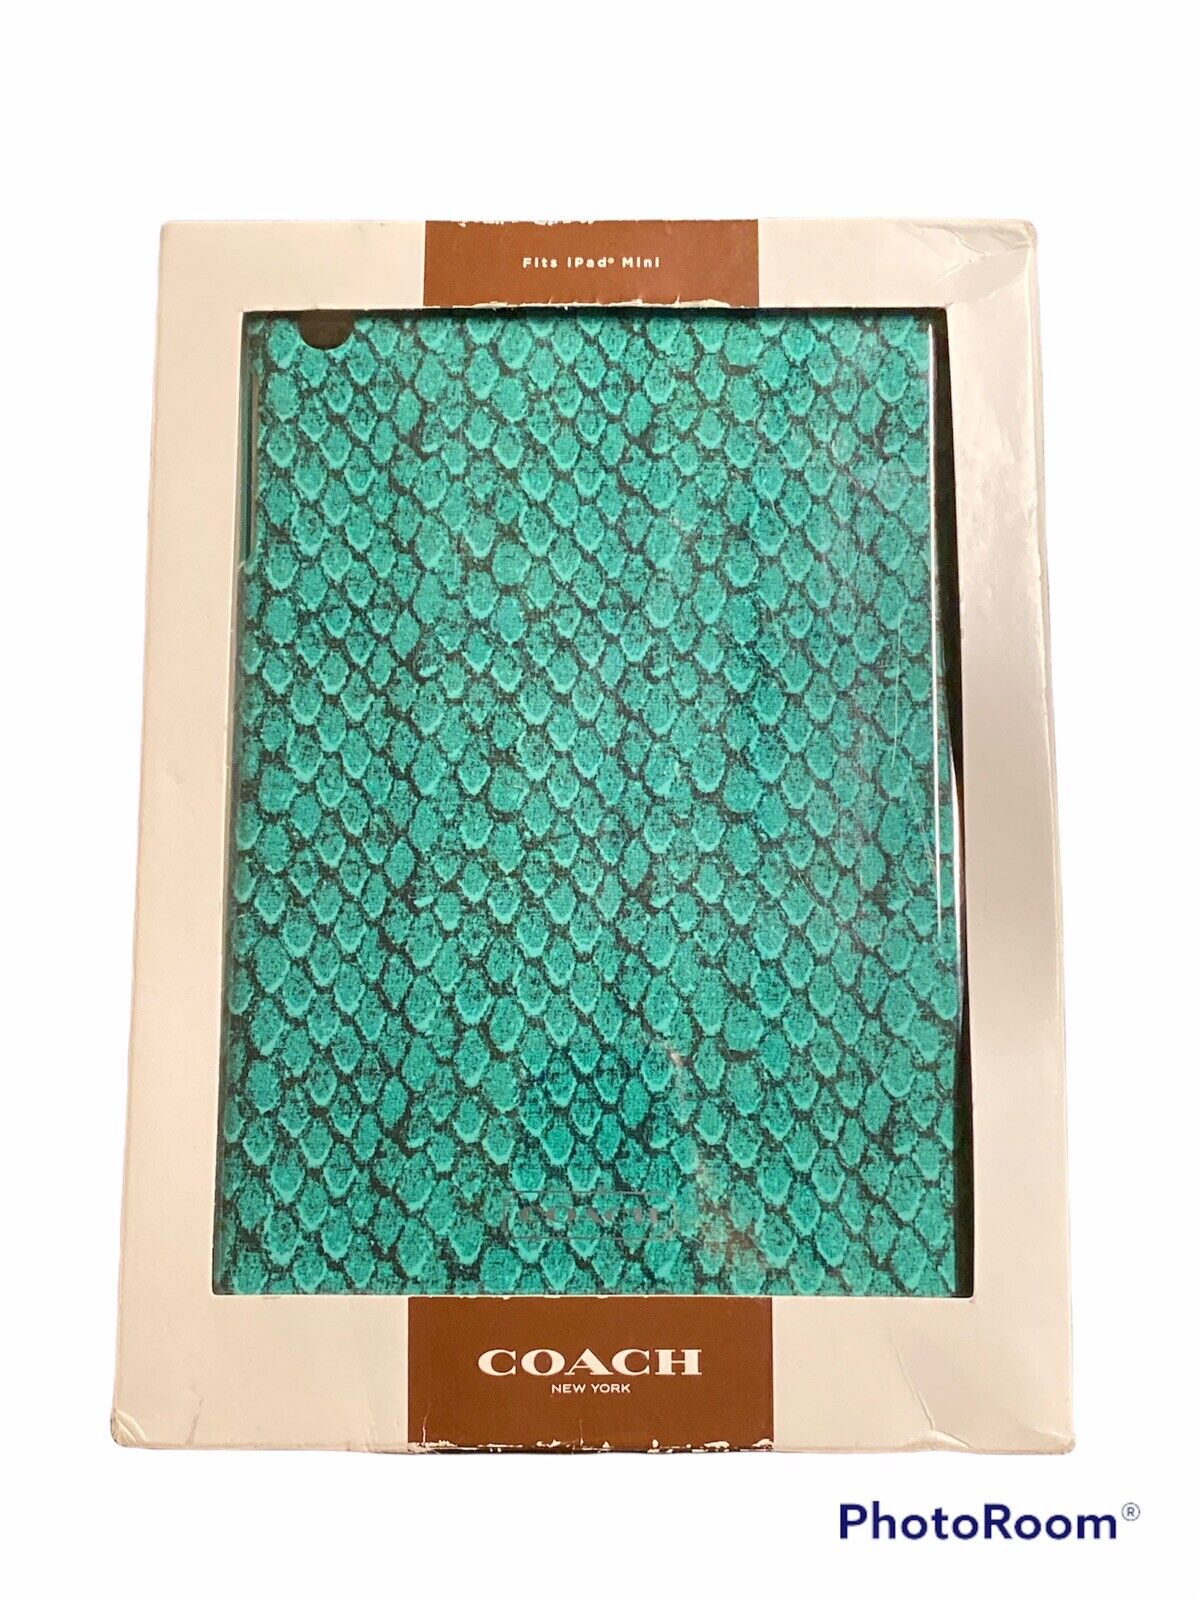 COACH 'Snakeskin' iPad Molded Hard Plastic Tablet Cover Green 134524 NOS 9” x 7”